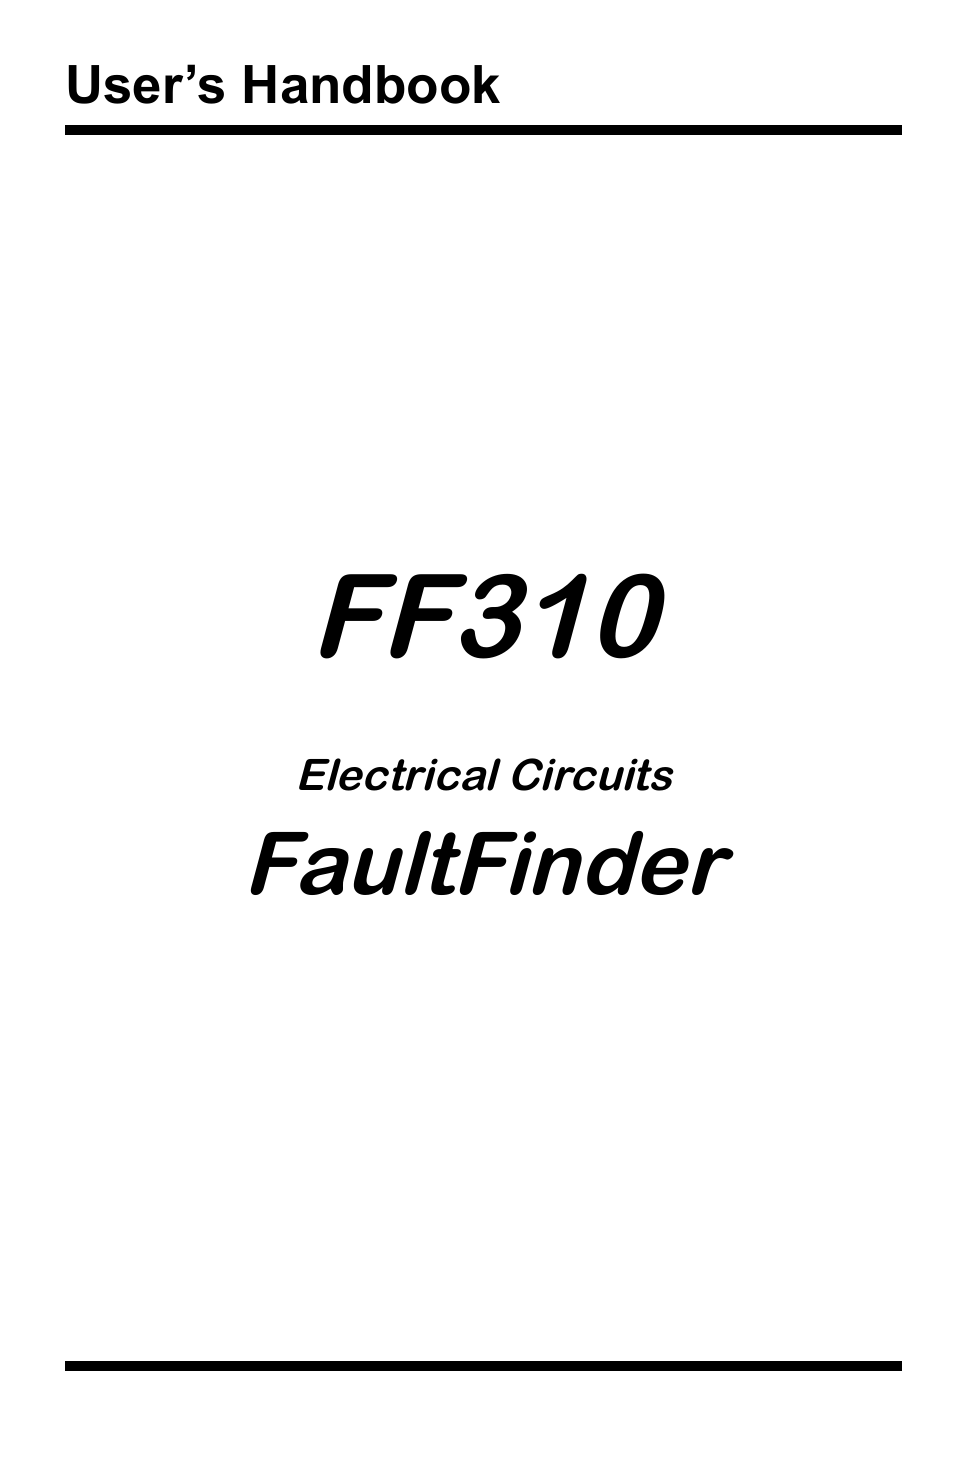 FF310 Fault Finder for Electrical Wiring Open / Short Circuit